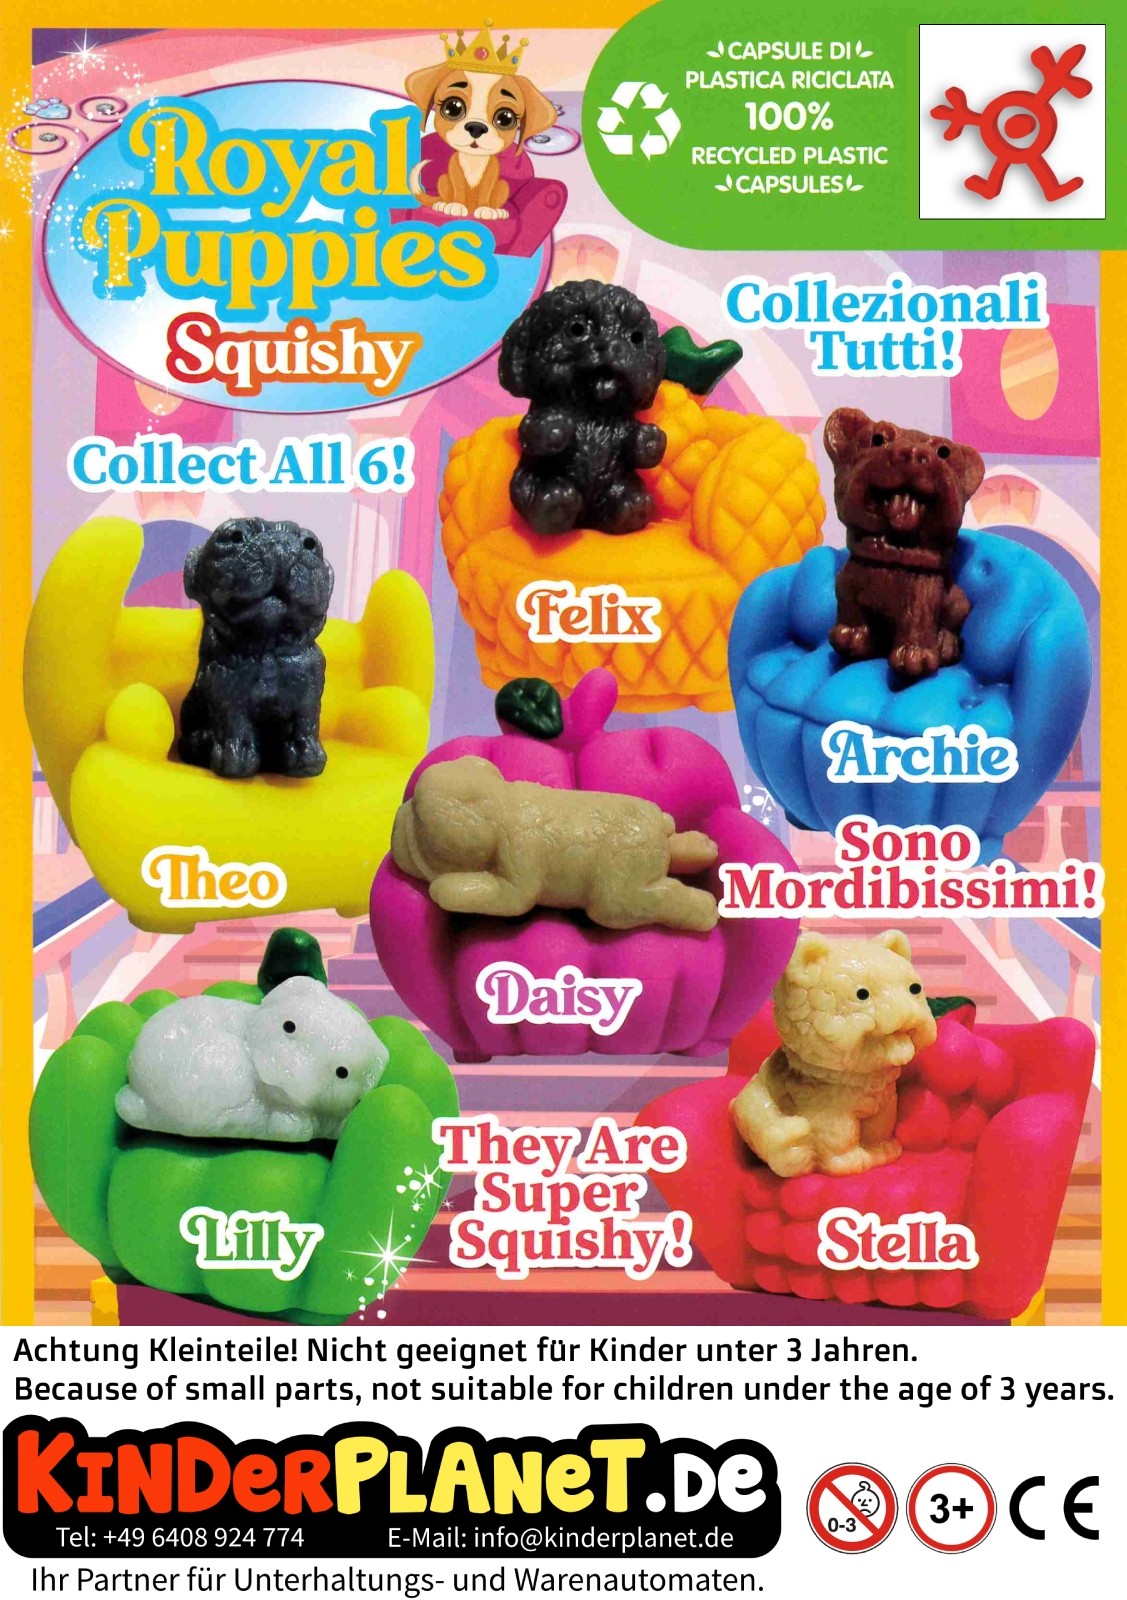 Squishy Royal Puppies in 65mm Kapsel